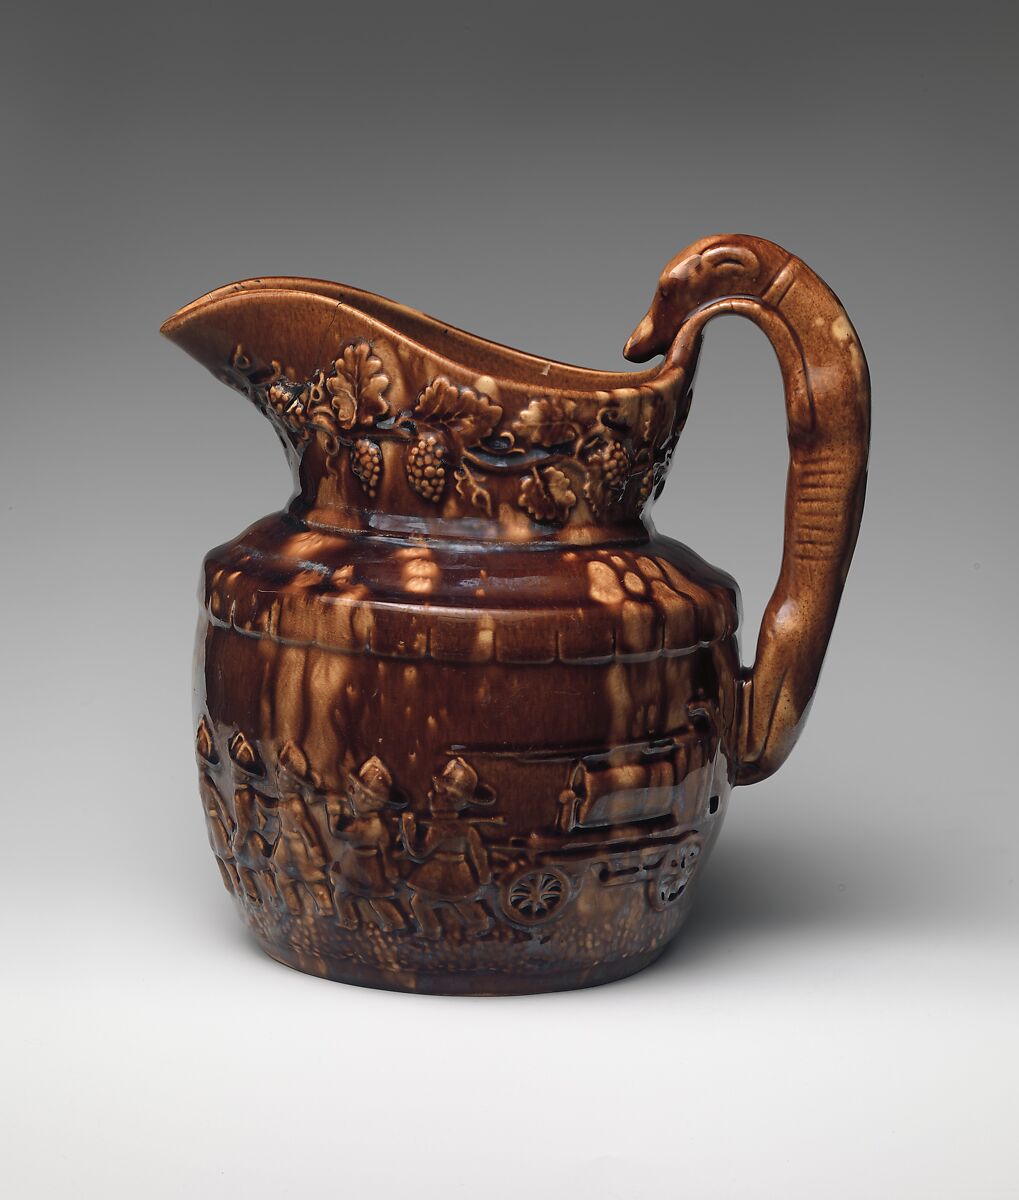 Pitcher, Probably Congress Pottery (1848–1854), Mottled brown earthenware, American 